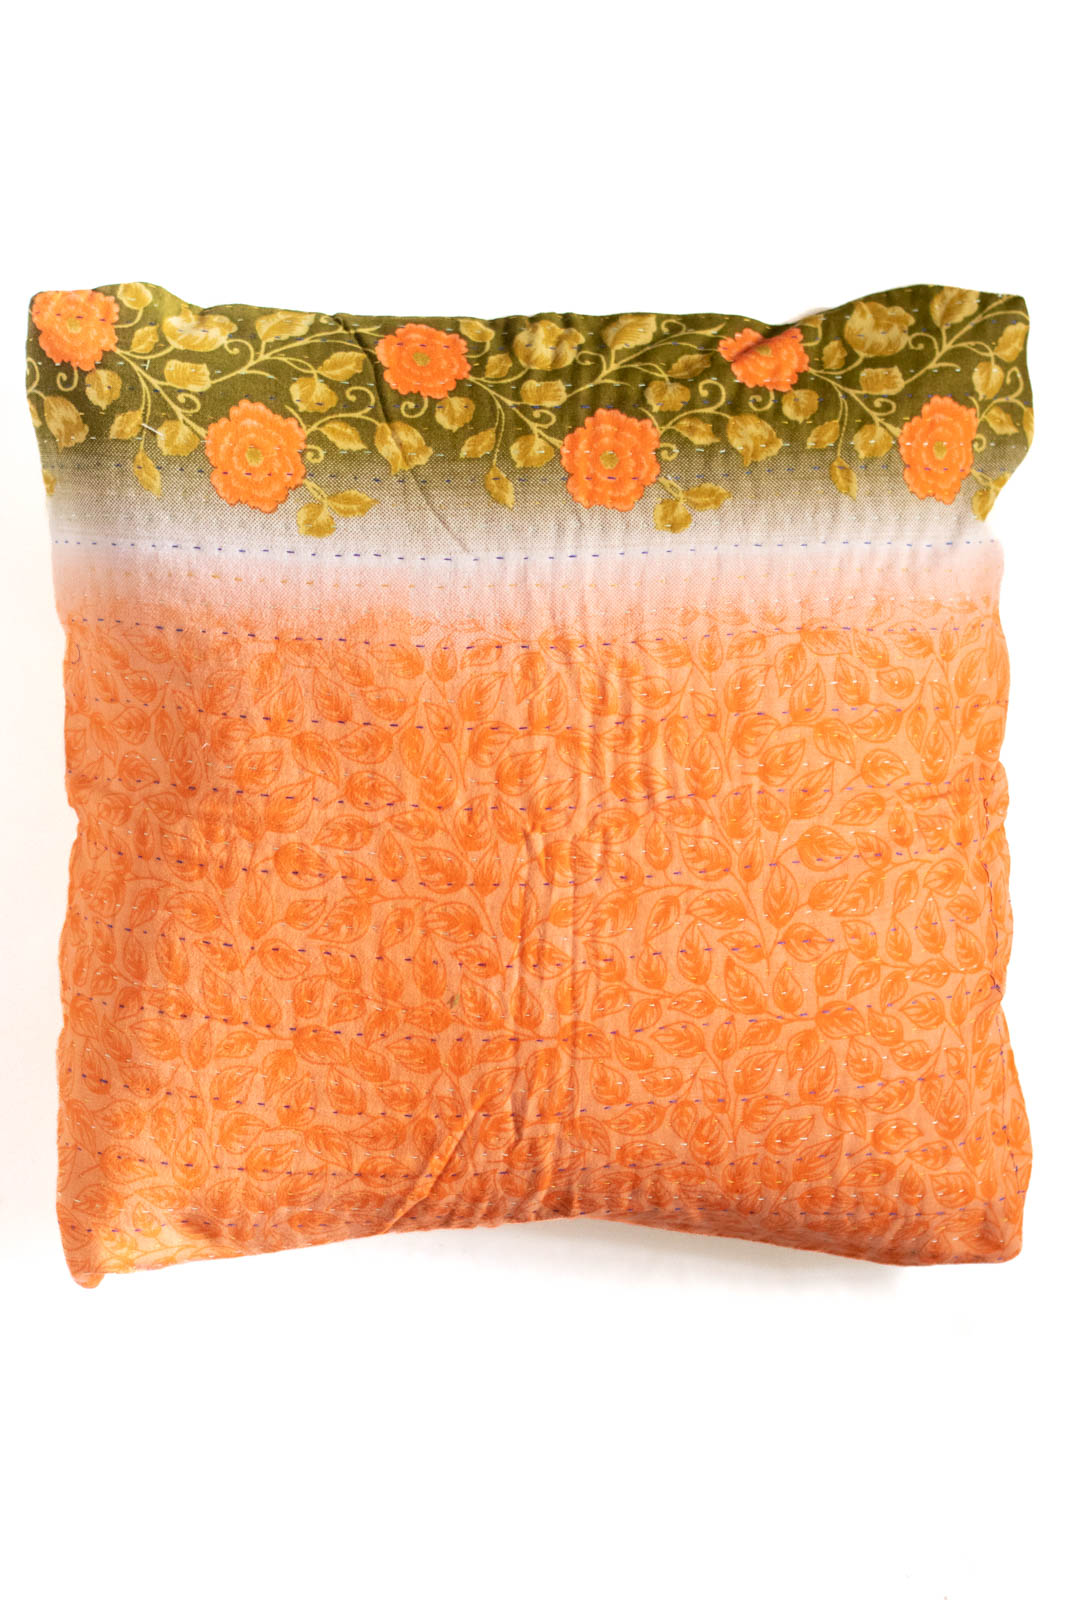 Worth no. 9 Kantha Pillow Cover